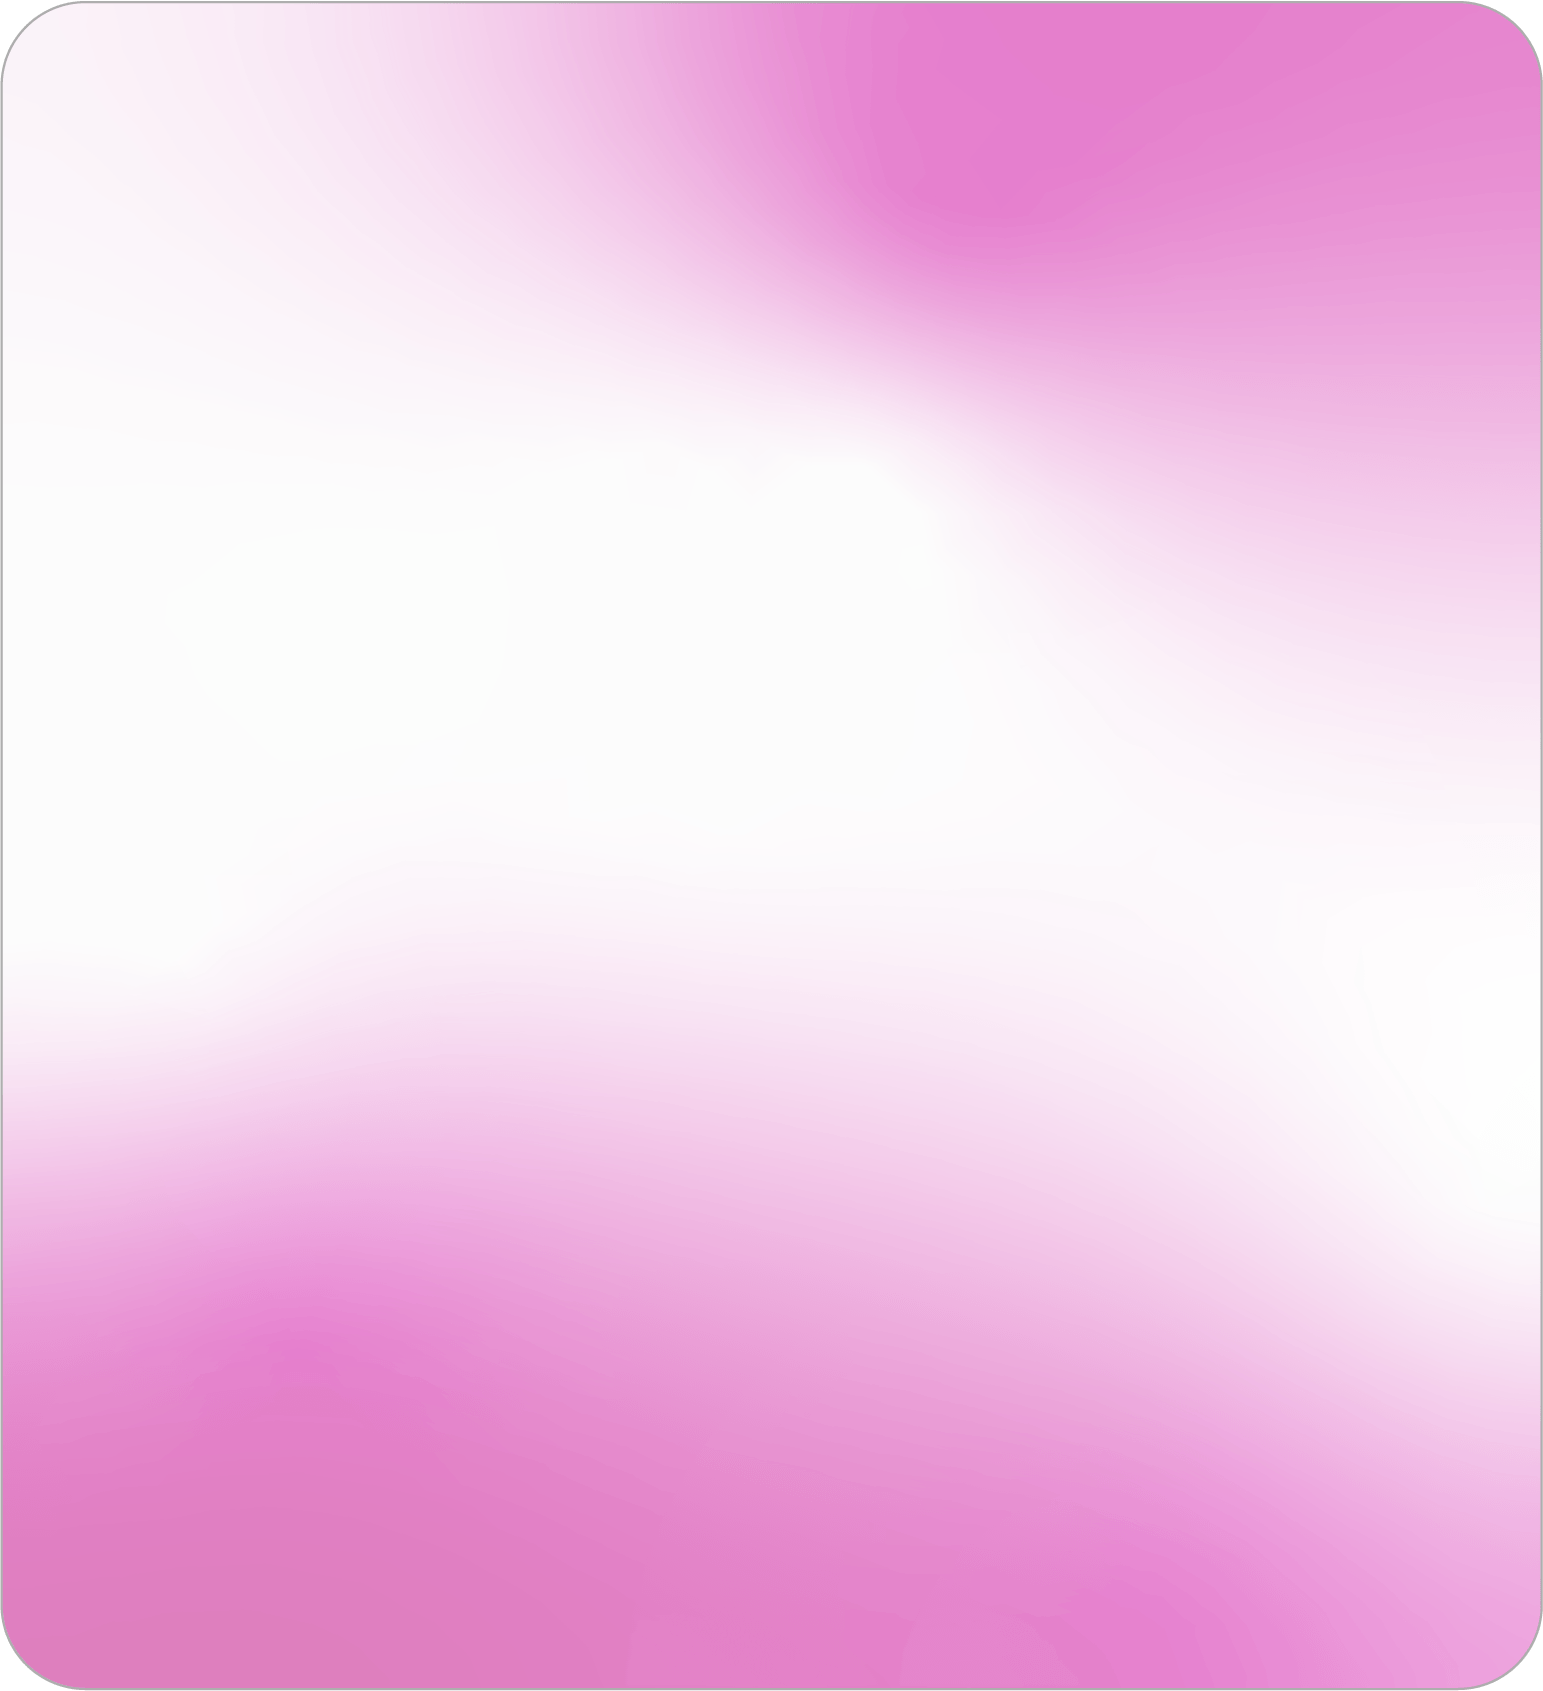 a pink square with a white border and a blurred background .